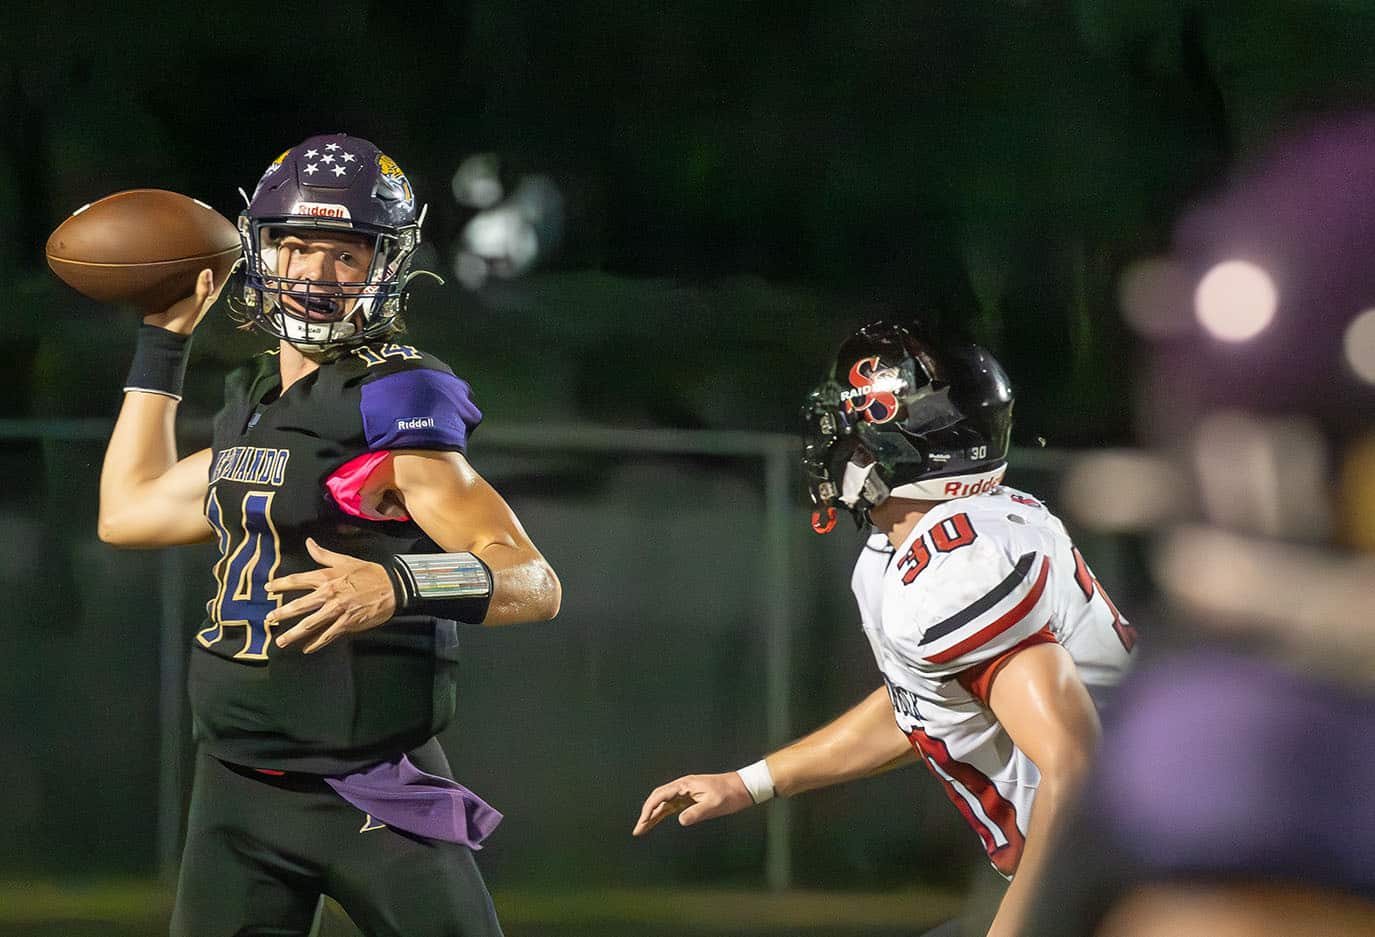 Hernando High QB, Michael Saltsman looks for an open receiver in the game with South Sumter Friday 10/13 in Brooksville. Photo by Joe DiCristofalo